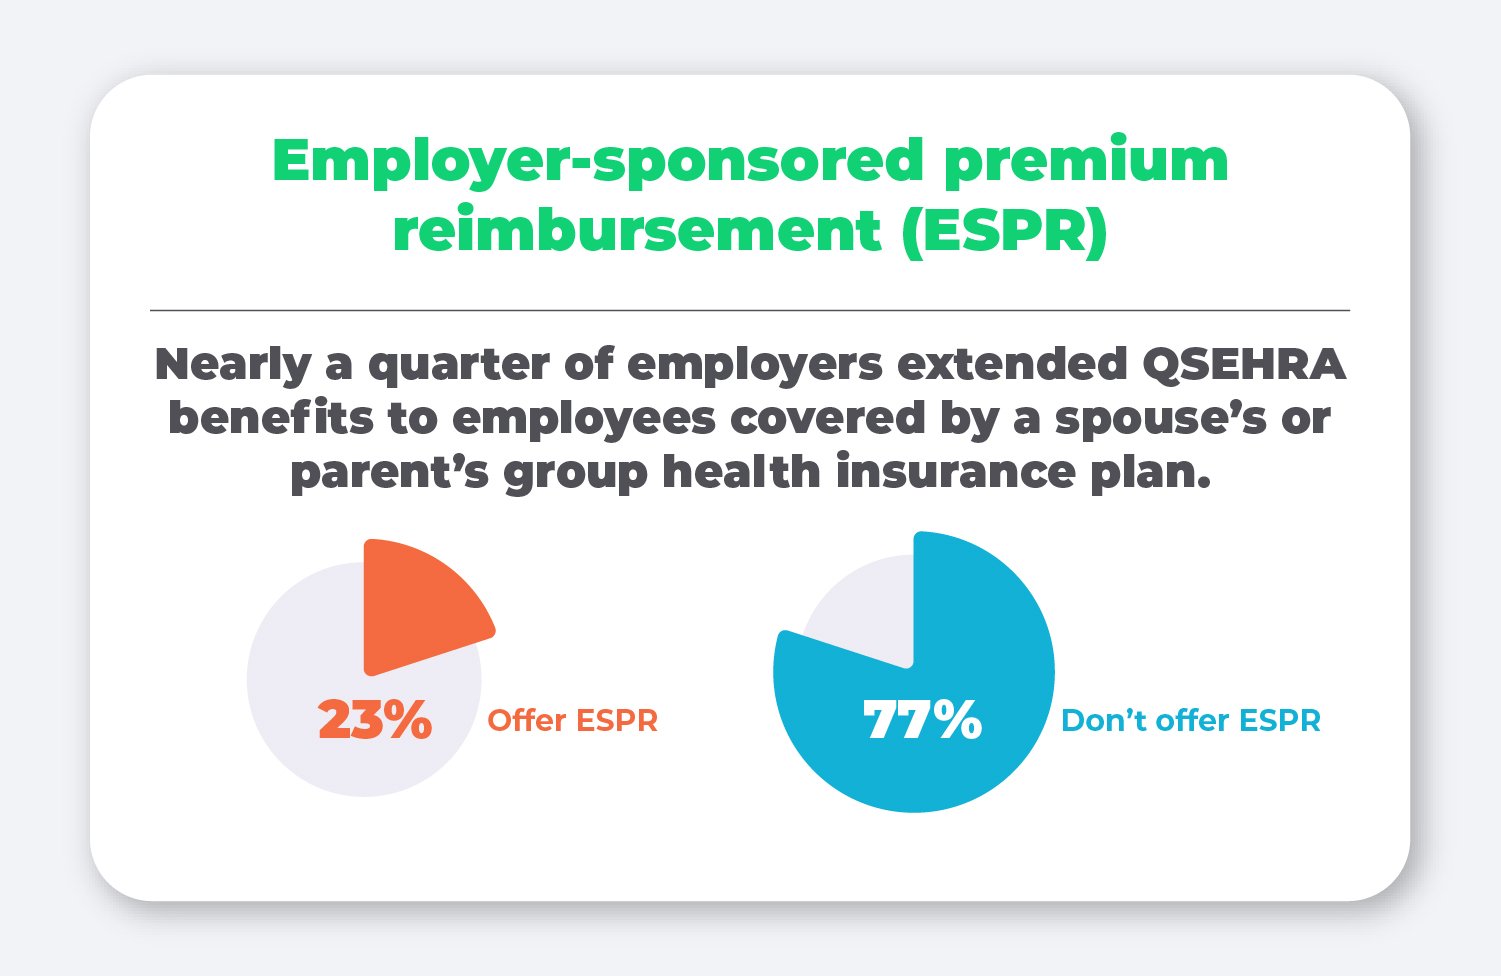 Employer-sponsored premium reimbursement (ESPR). Nearly a quarter of employees extended QSEHRA benefit to employees covered by a spouse's or parent's group health insurance plan.